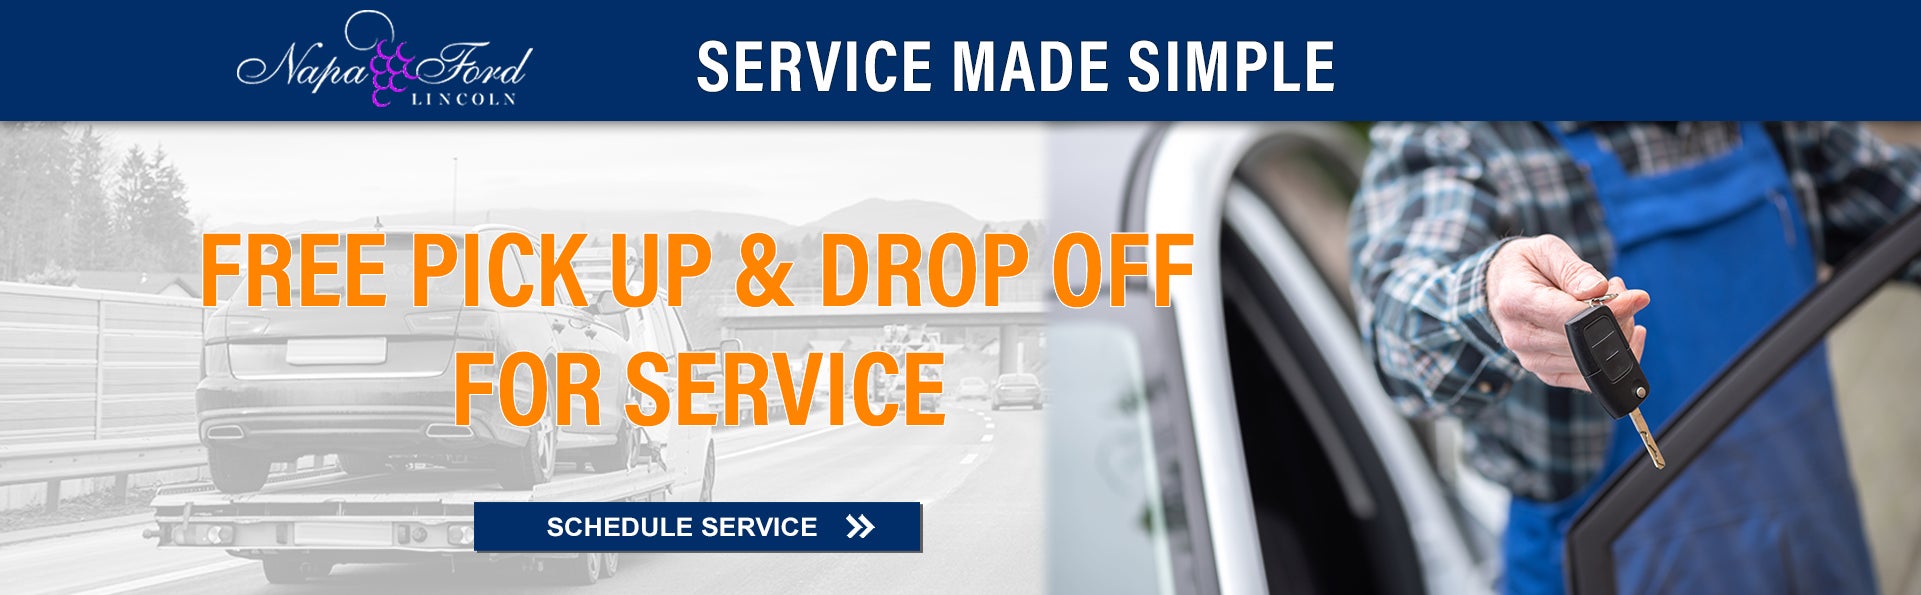 Free Pick up & Drop off for Service